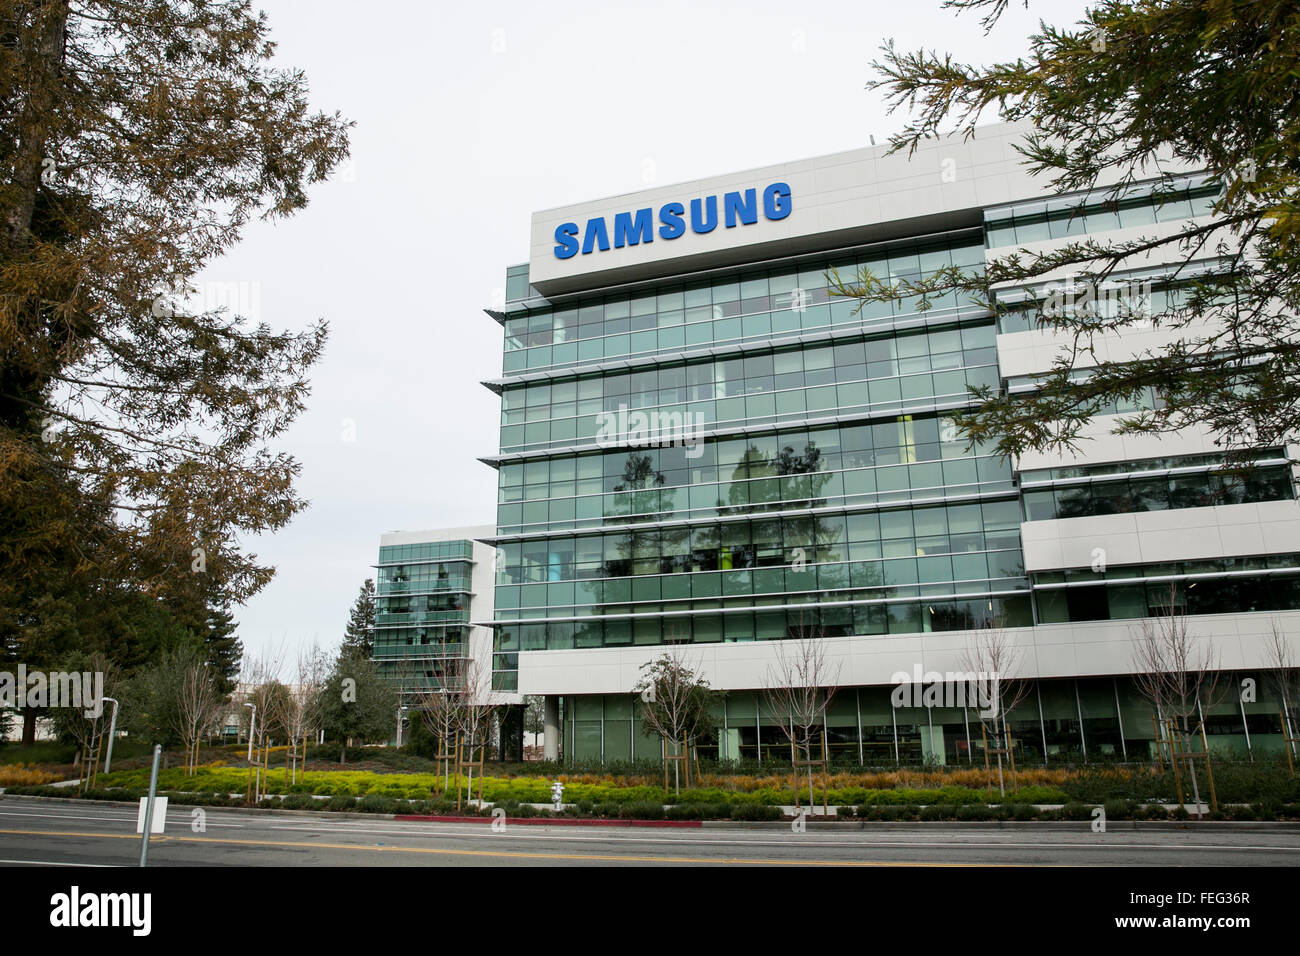 A logo sign outside of a facility occupied by Samsung in Sunnyvale, California on January 24, 2016. Stock Photo